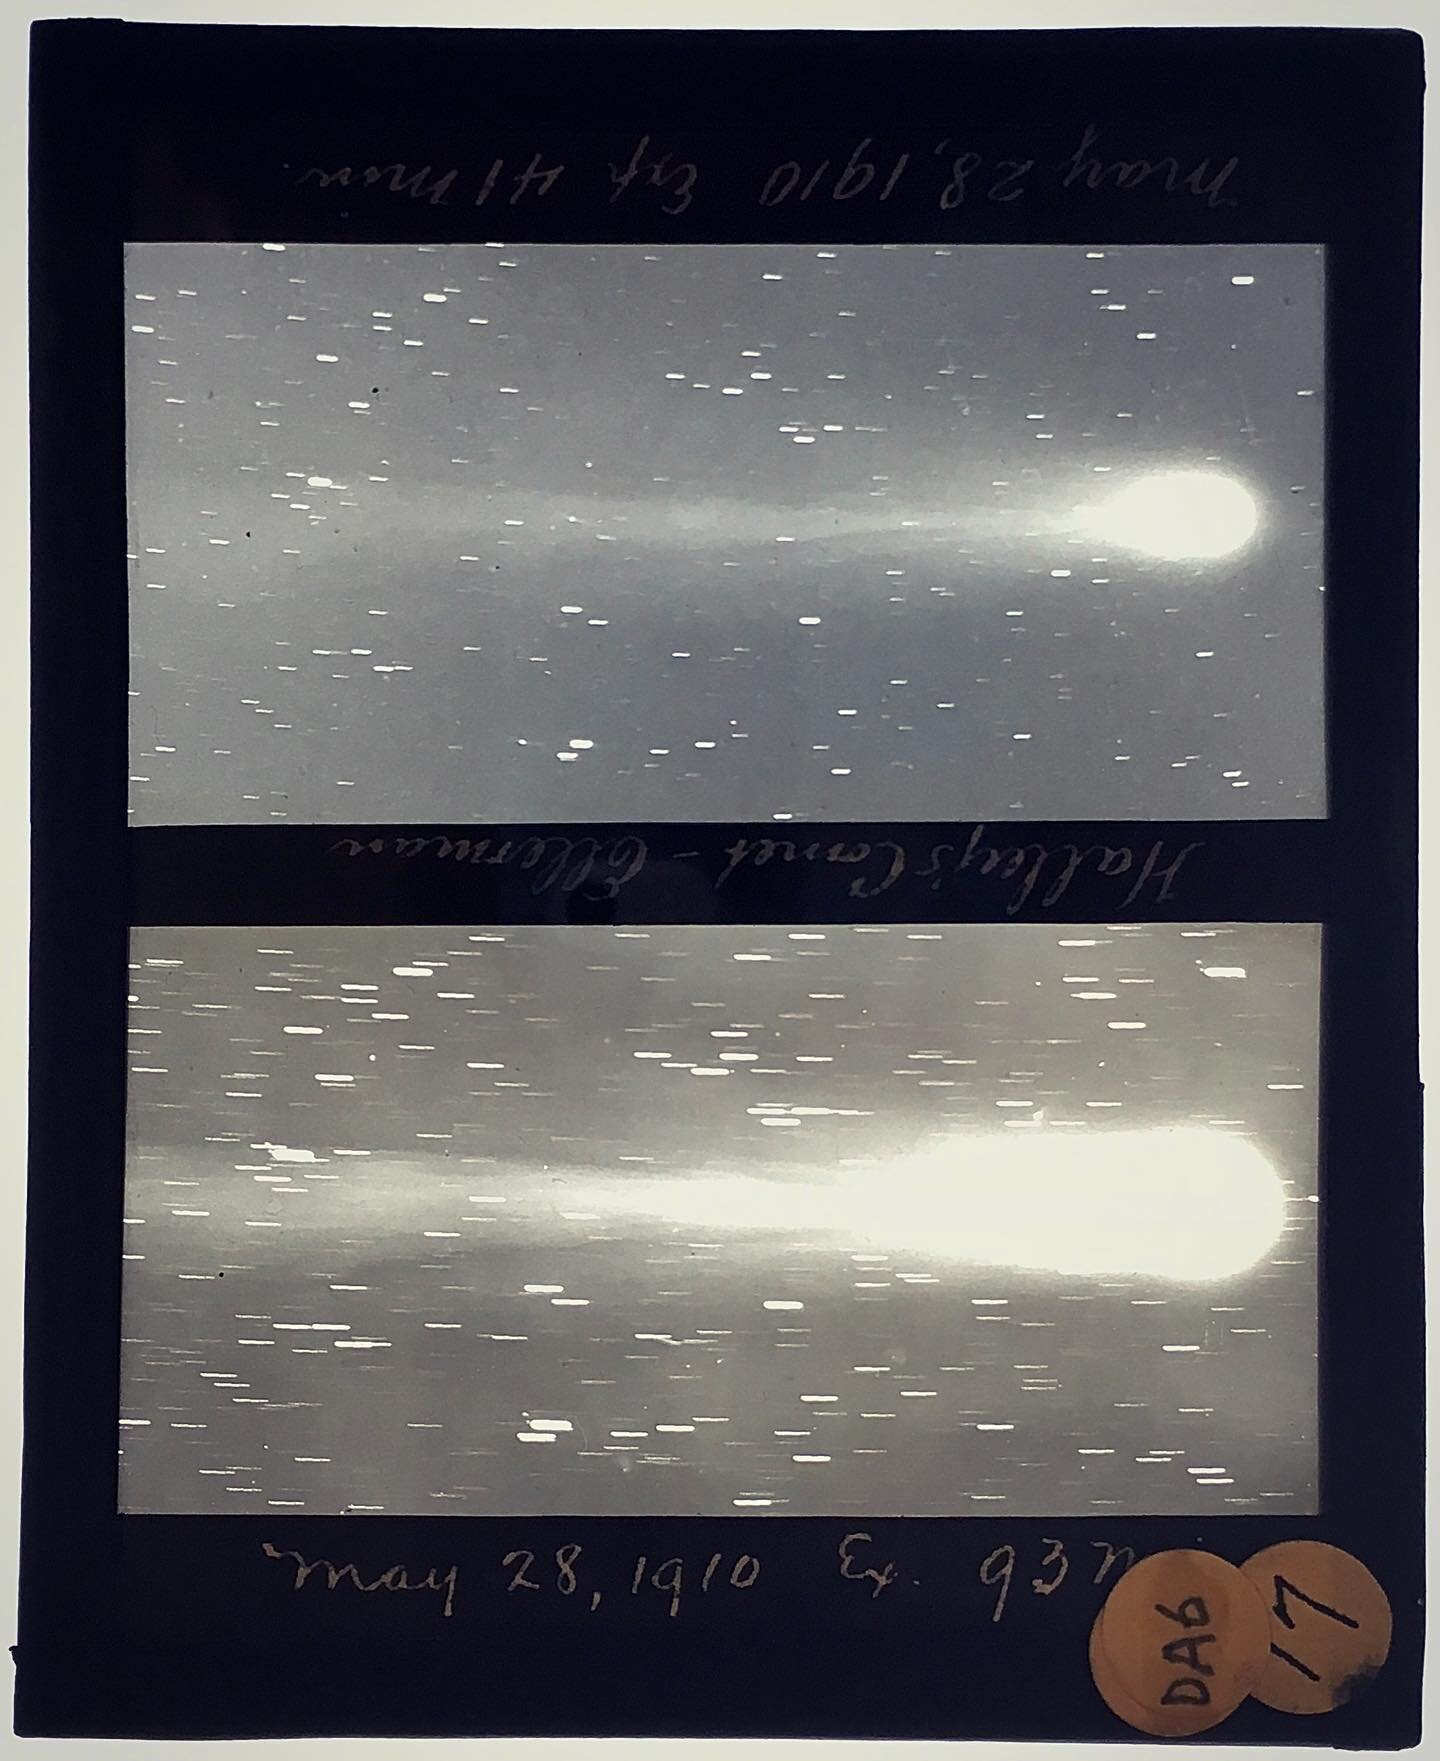 Seeing so many extraordinary Comet NEOWISE photos reminded me of these slides I saw while researching @mtwilsonobservatory archive @carnegieastro. These are slide images of Halley&rsquo;s Comet taken in May 1910. 

The fascinating etymology of the wo